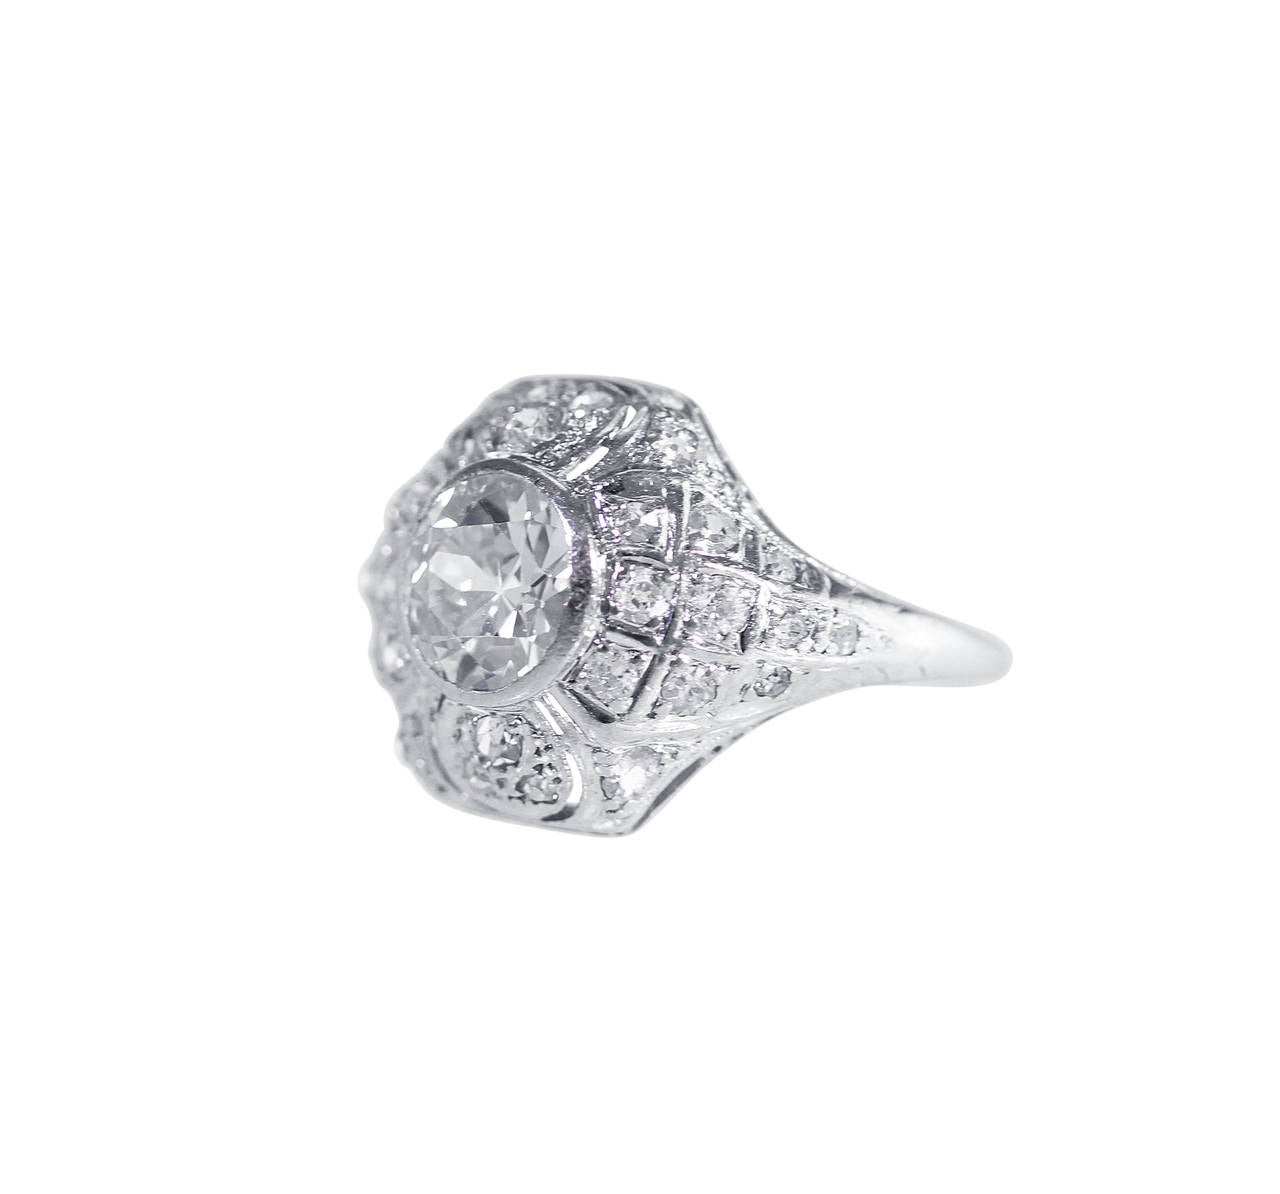 An Art Deco platinum and diamond ring, set in the center with an old European-cut diamond weighing approximately 1.15 carats, within a domed framed set with 30 smaller old European-cut diamonds weighing approximately 0.60 carat, gross weight 3.8